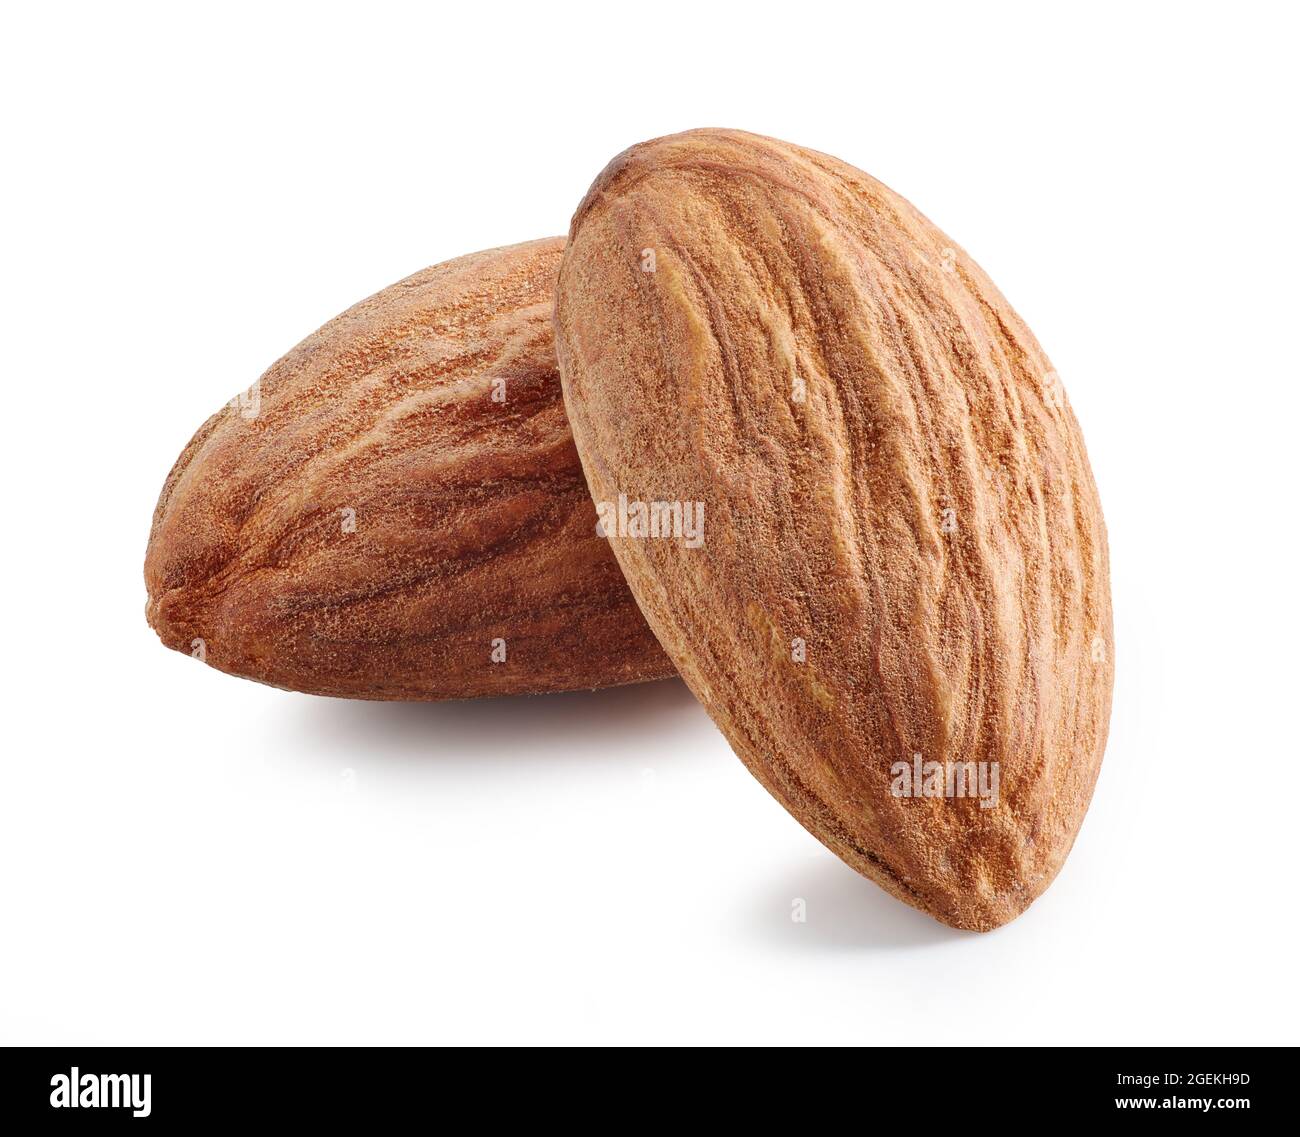 almonds macro isolated on white background, full depth of field Stock Photo